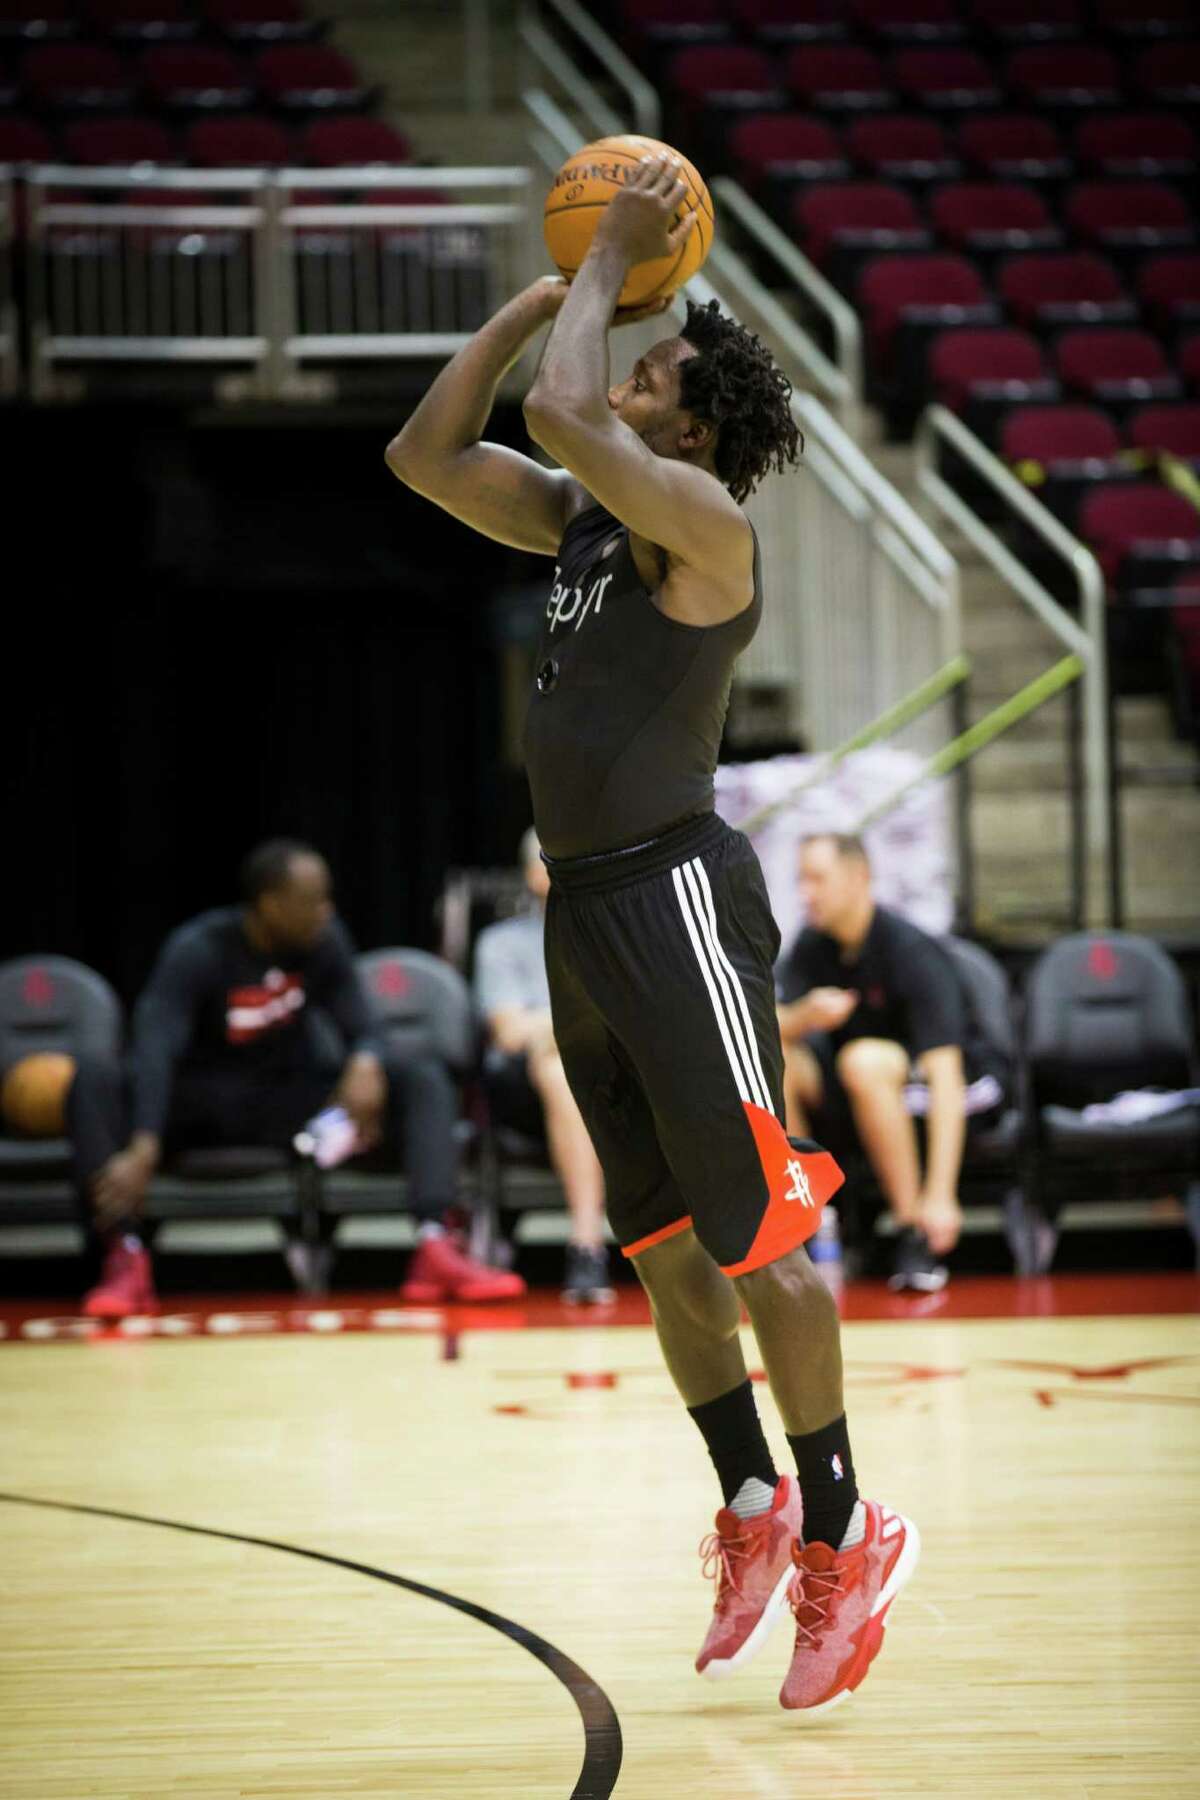 Houston Rockets guard Patrick Beverley shoots a free throw during the first day of practice, Saturday, Sept. 24, 2016, at the Toyota Center in Houston.